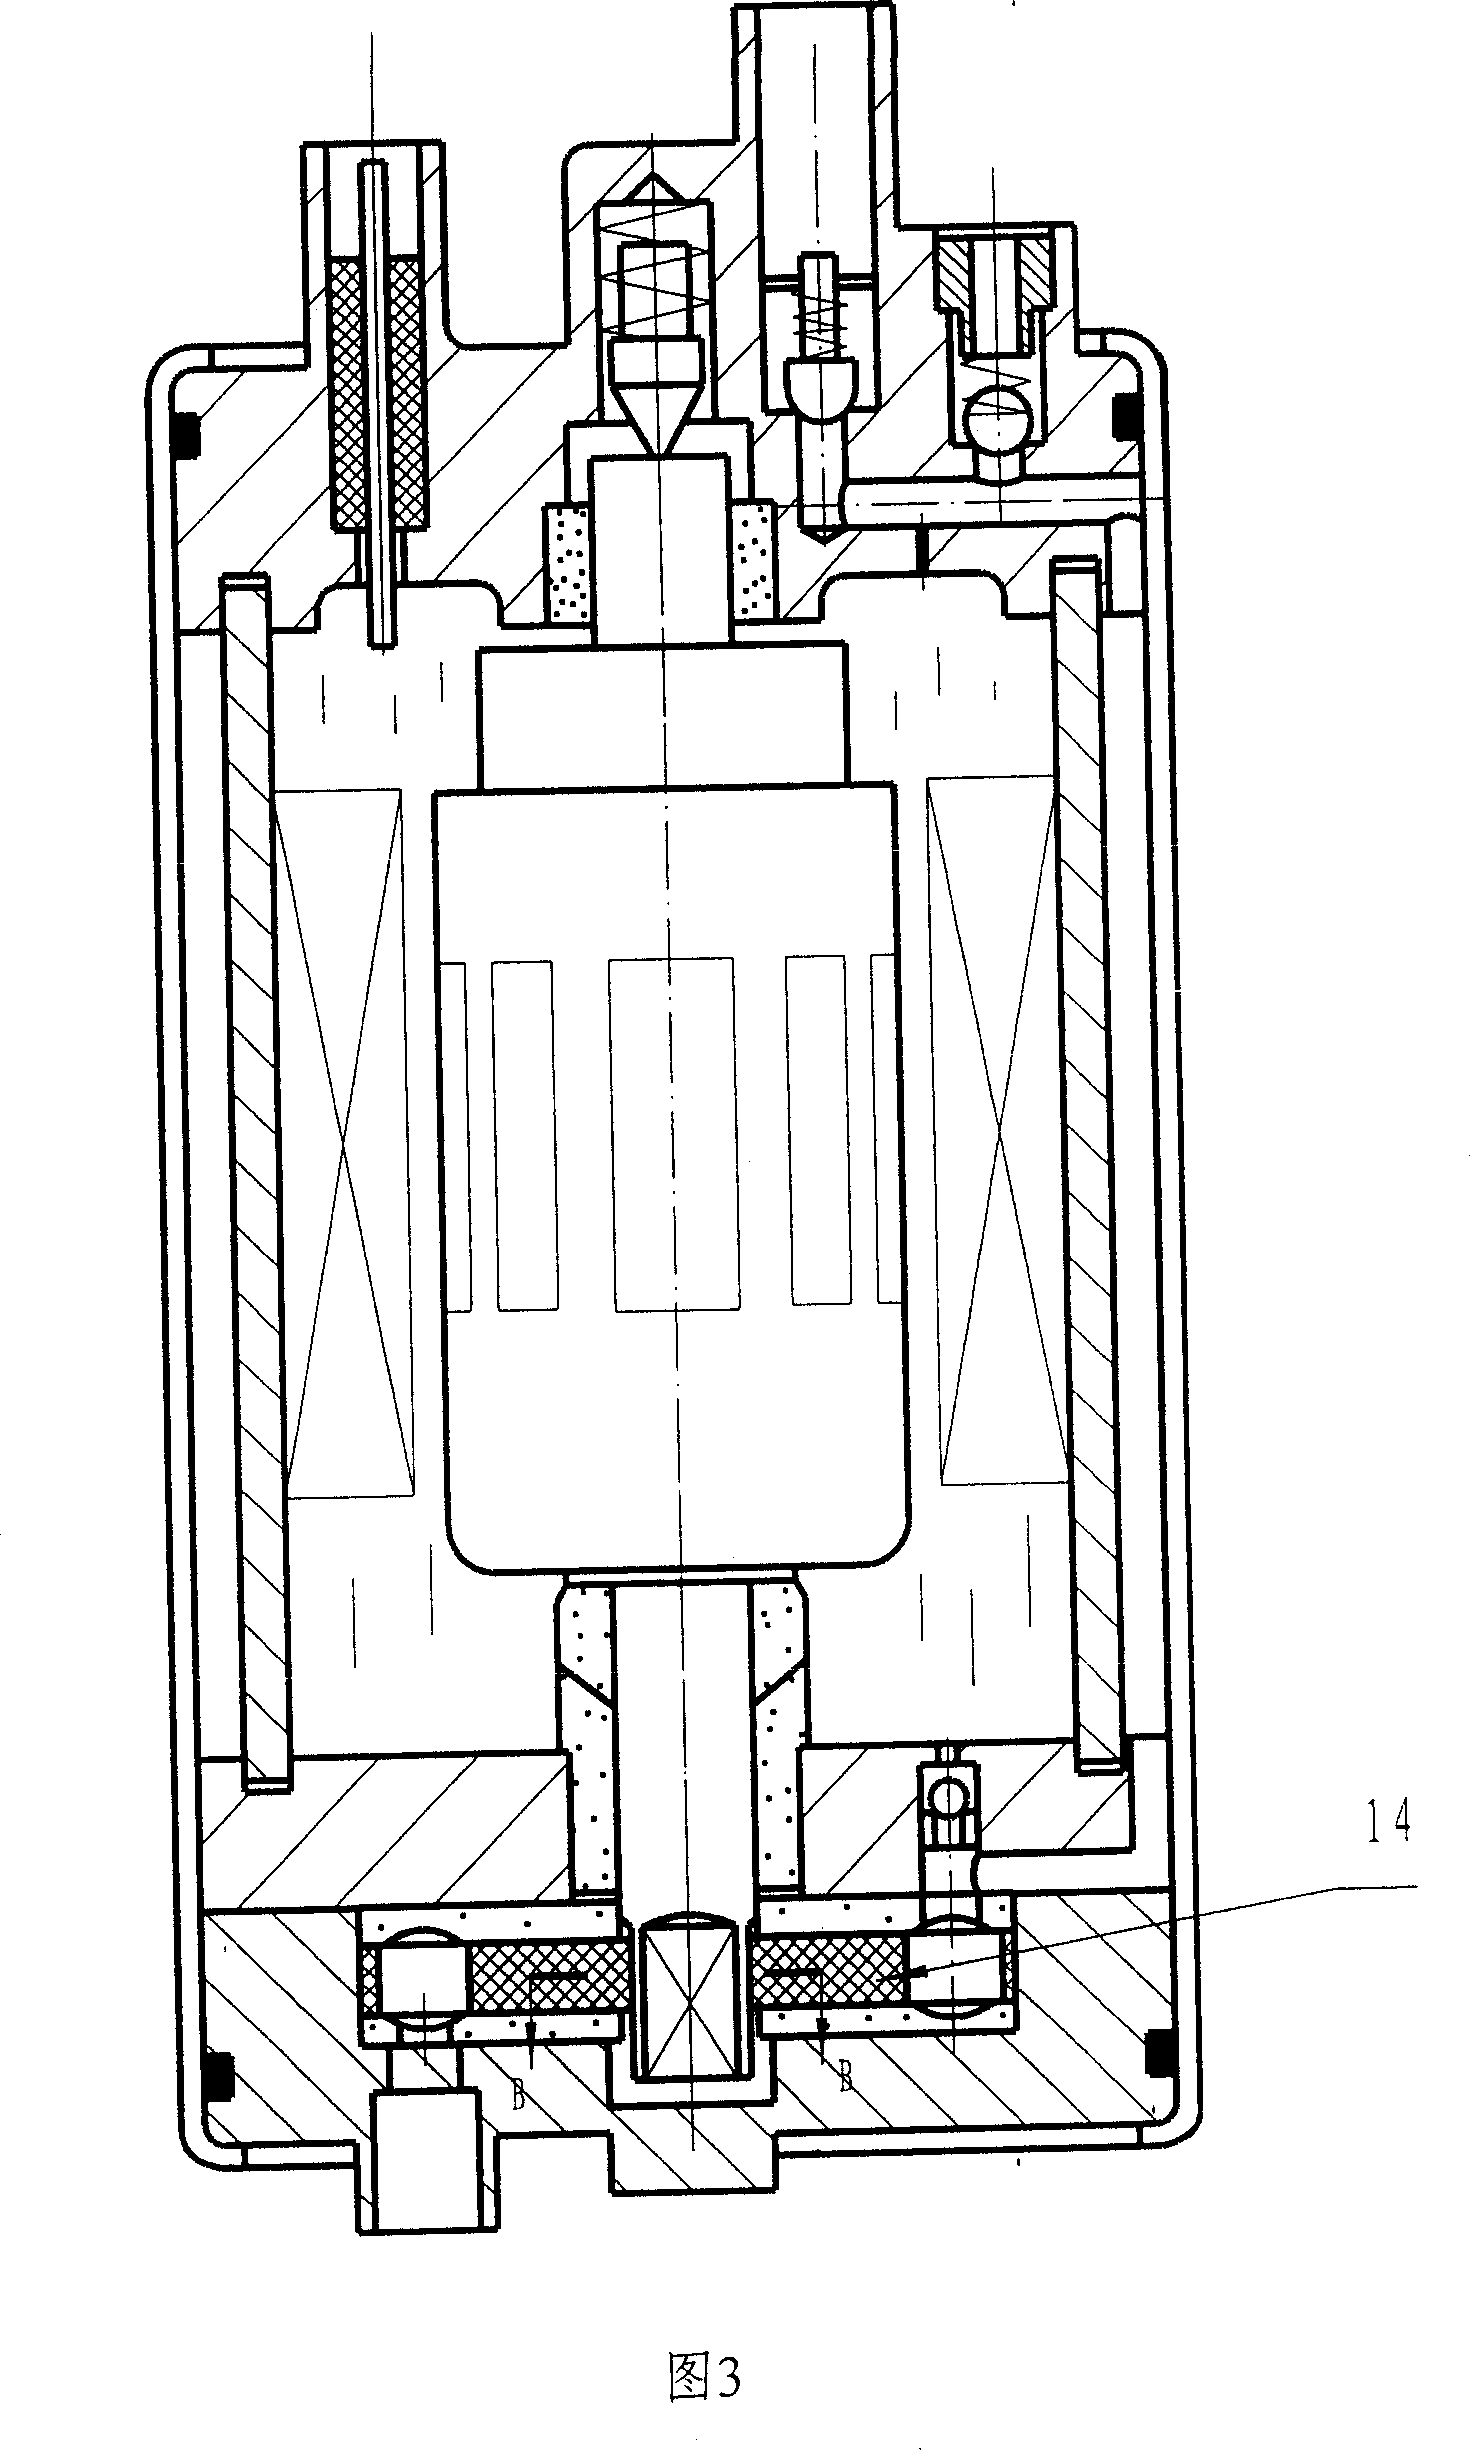 Electric fuel pump suitable for fuel containing alcohol